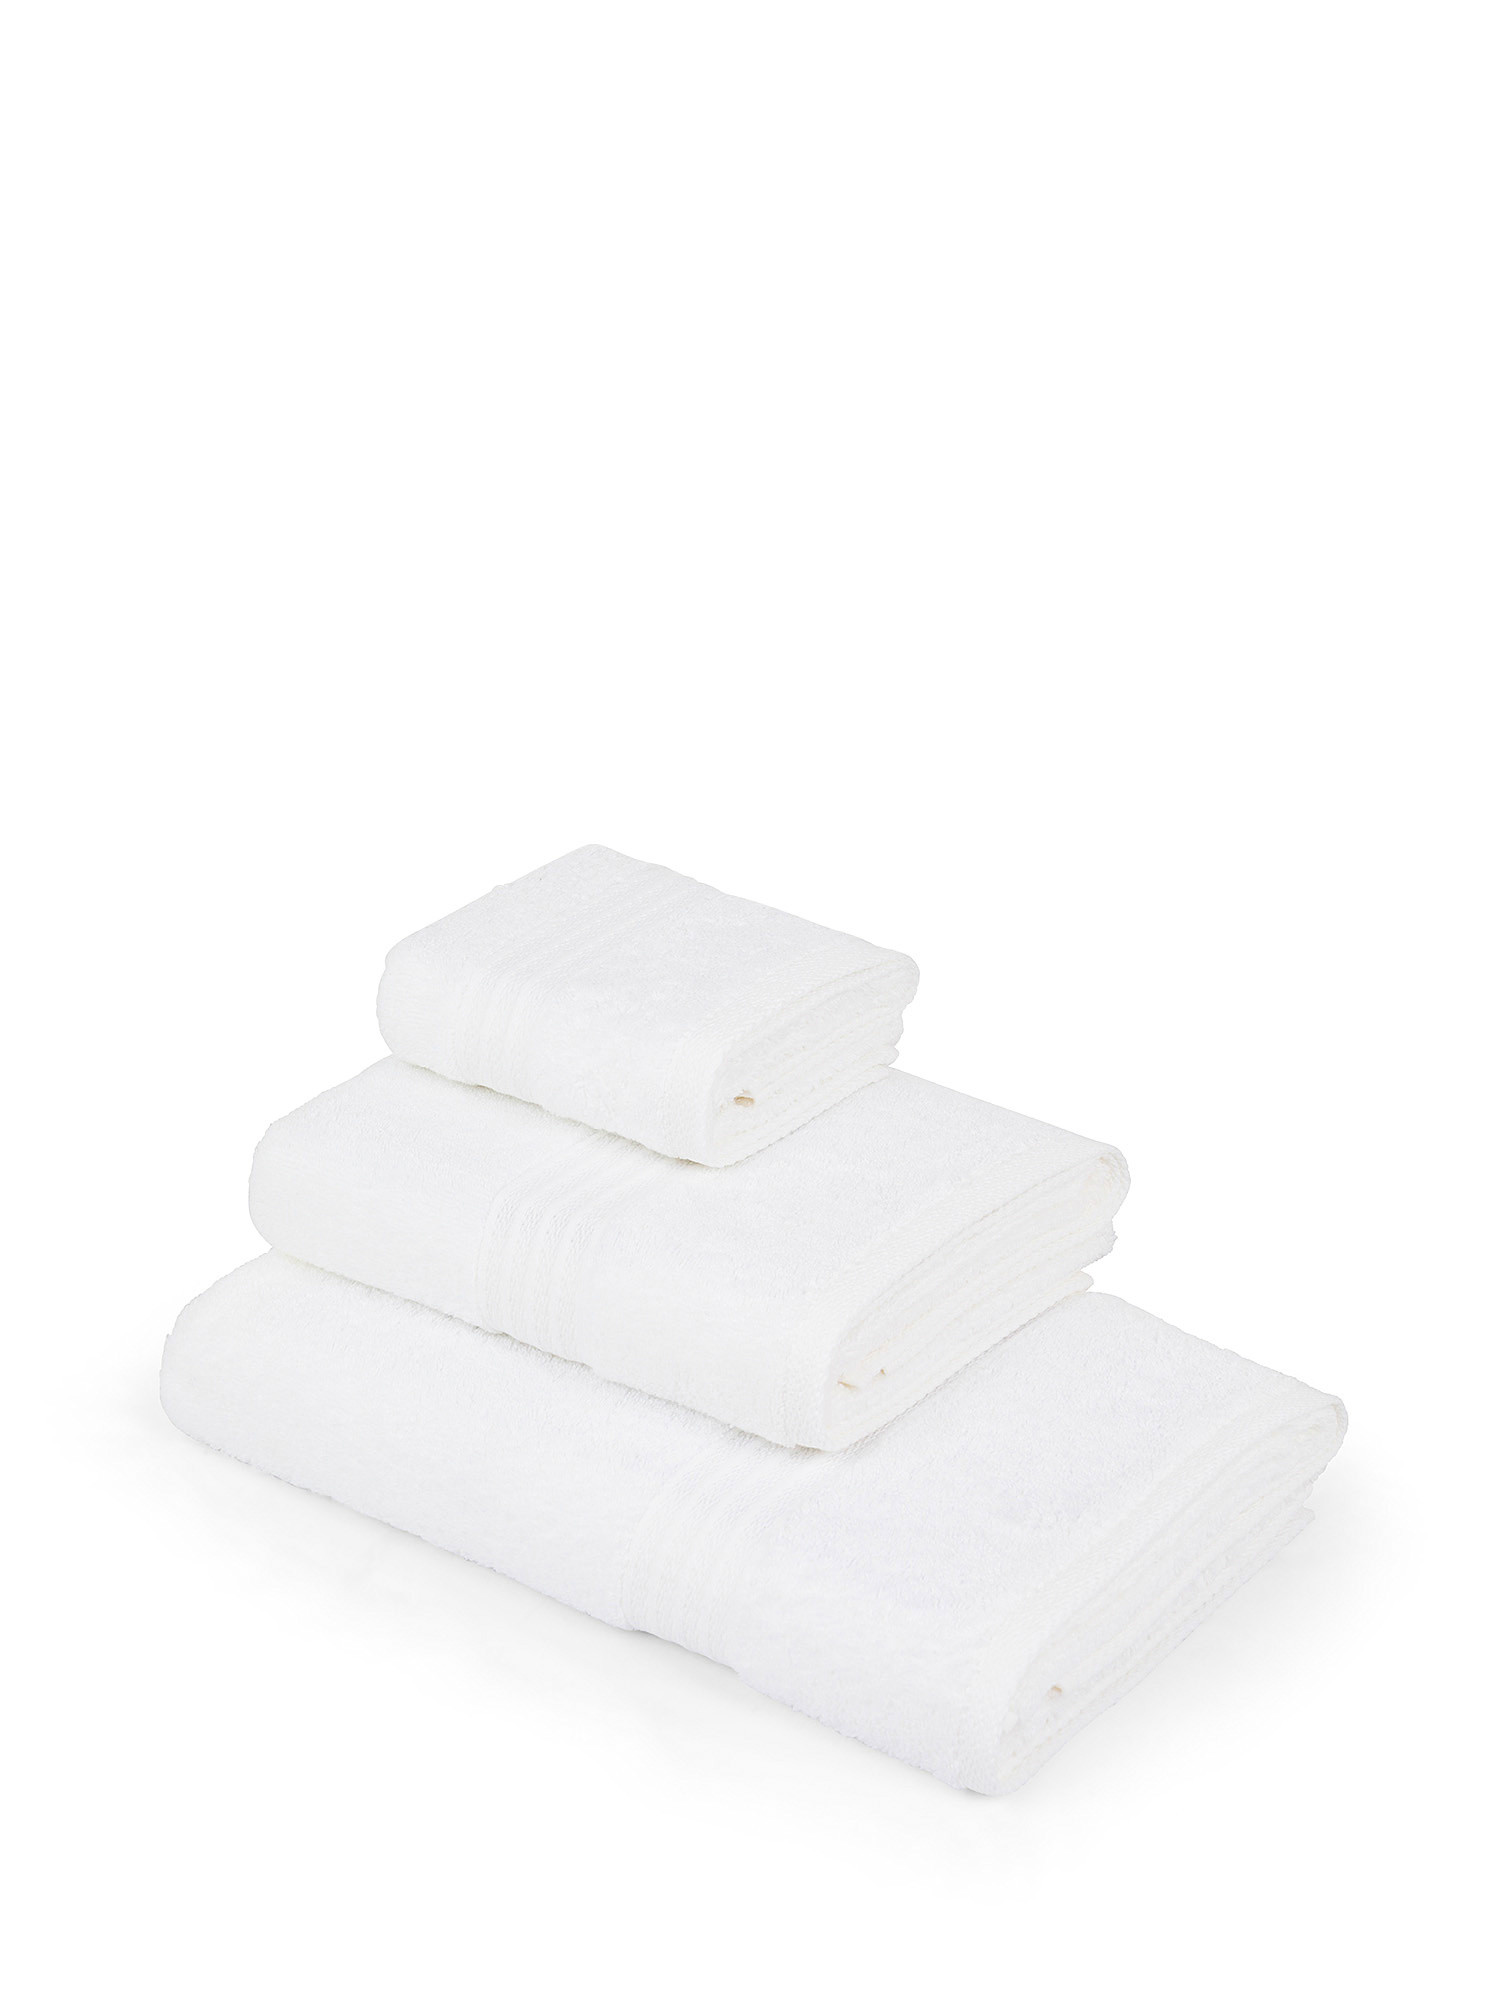 Zefiro solid color 100% cotton towel, White, large image number 0